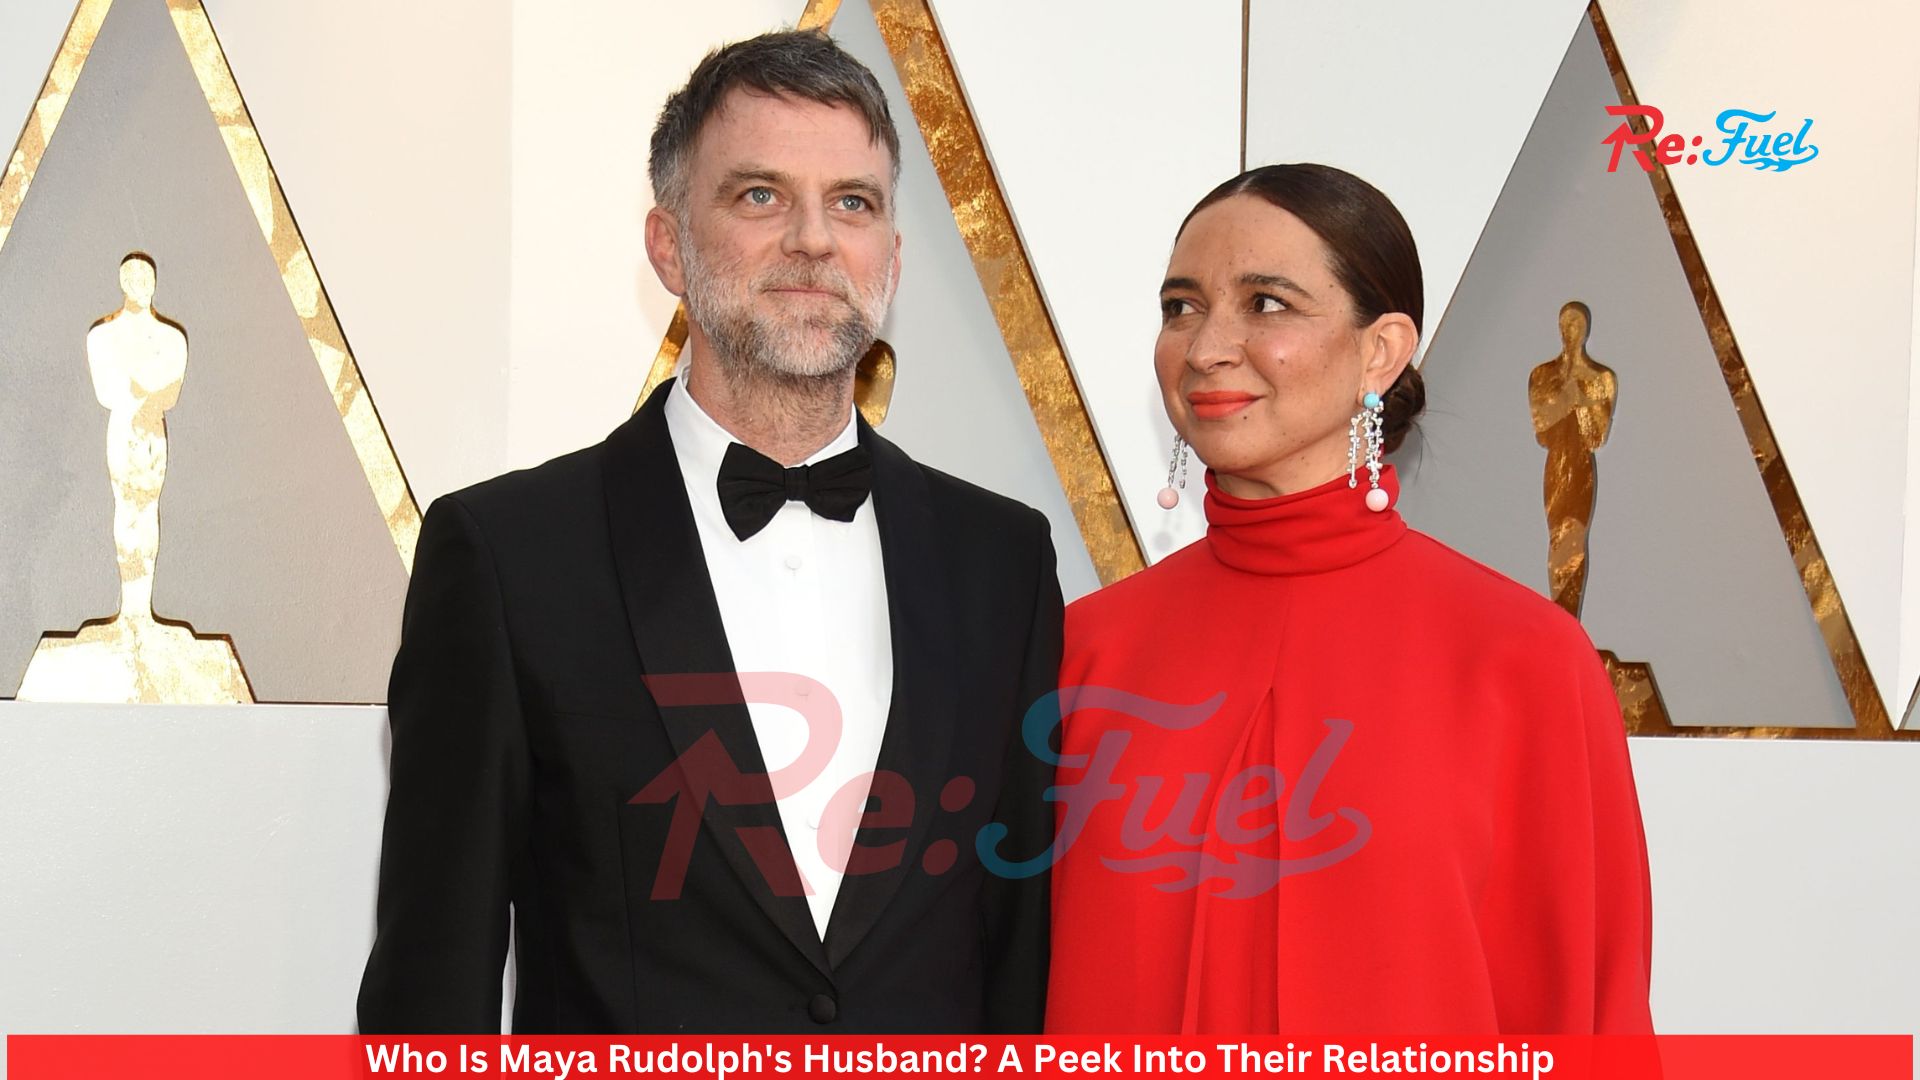 Who Is Maya Rudolph's Husband? A Peek Into Their Relationship